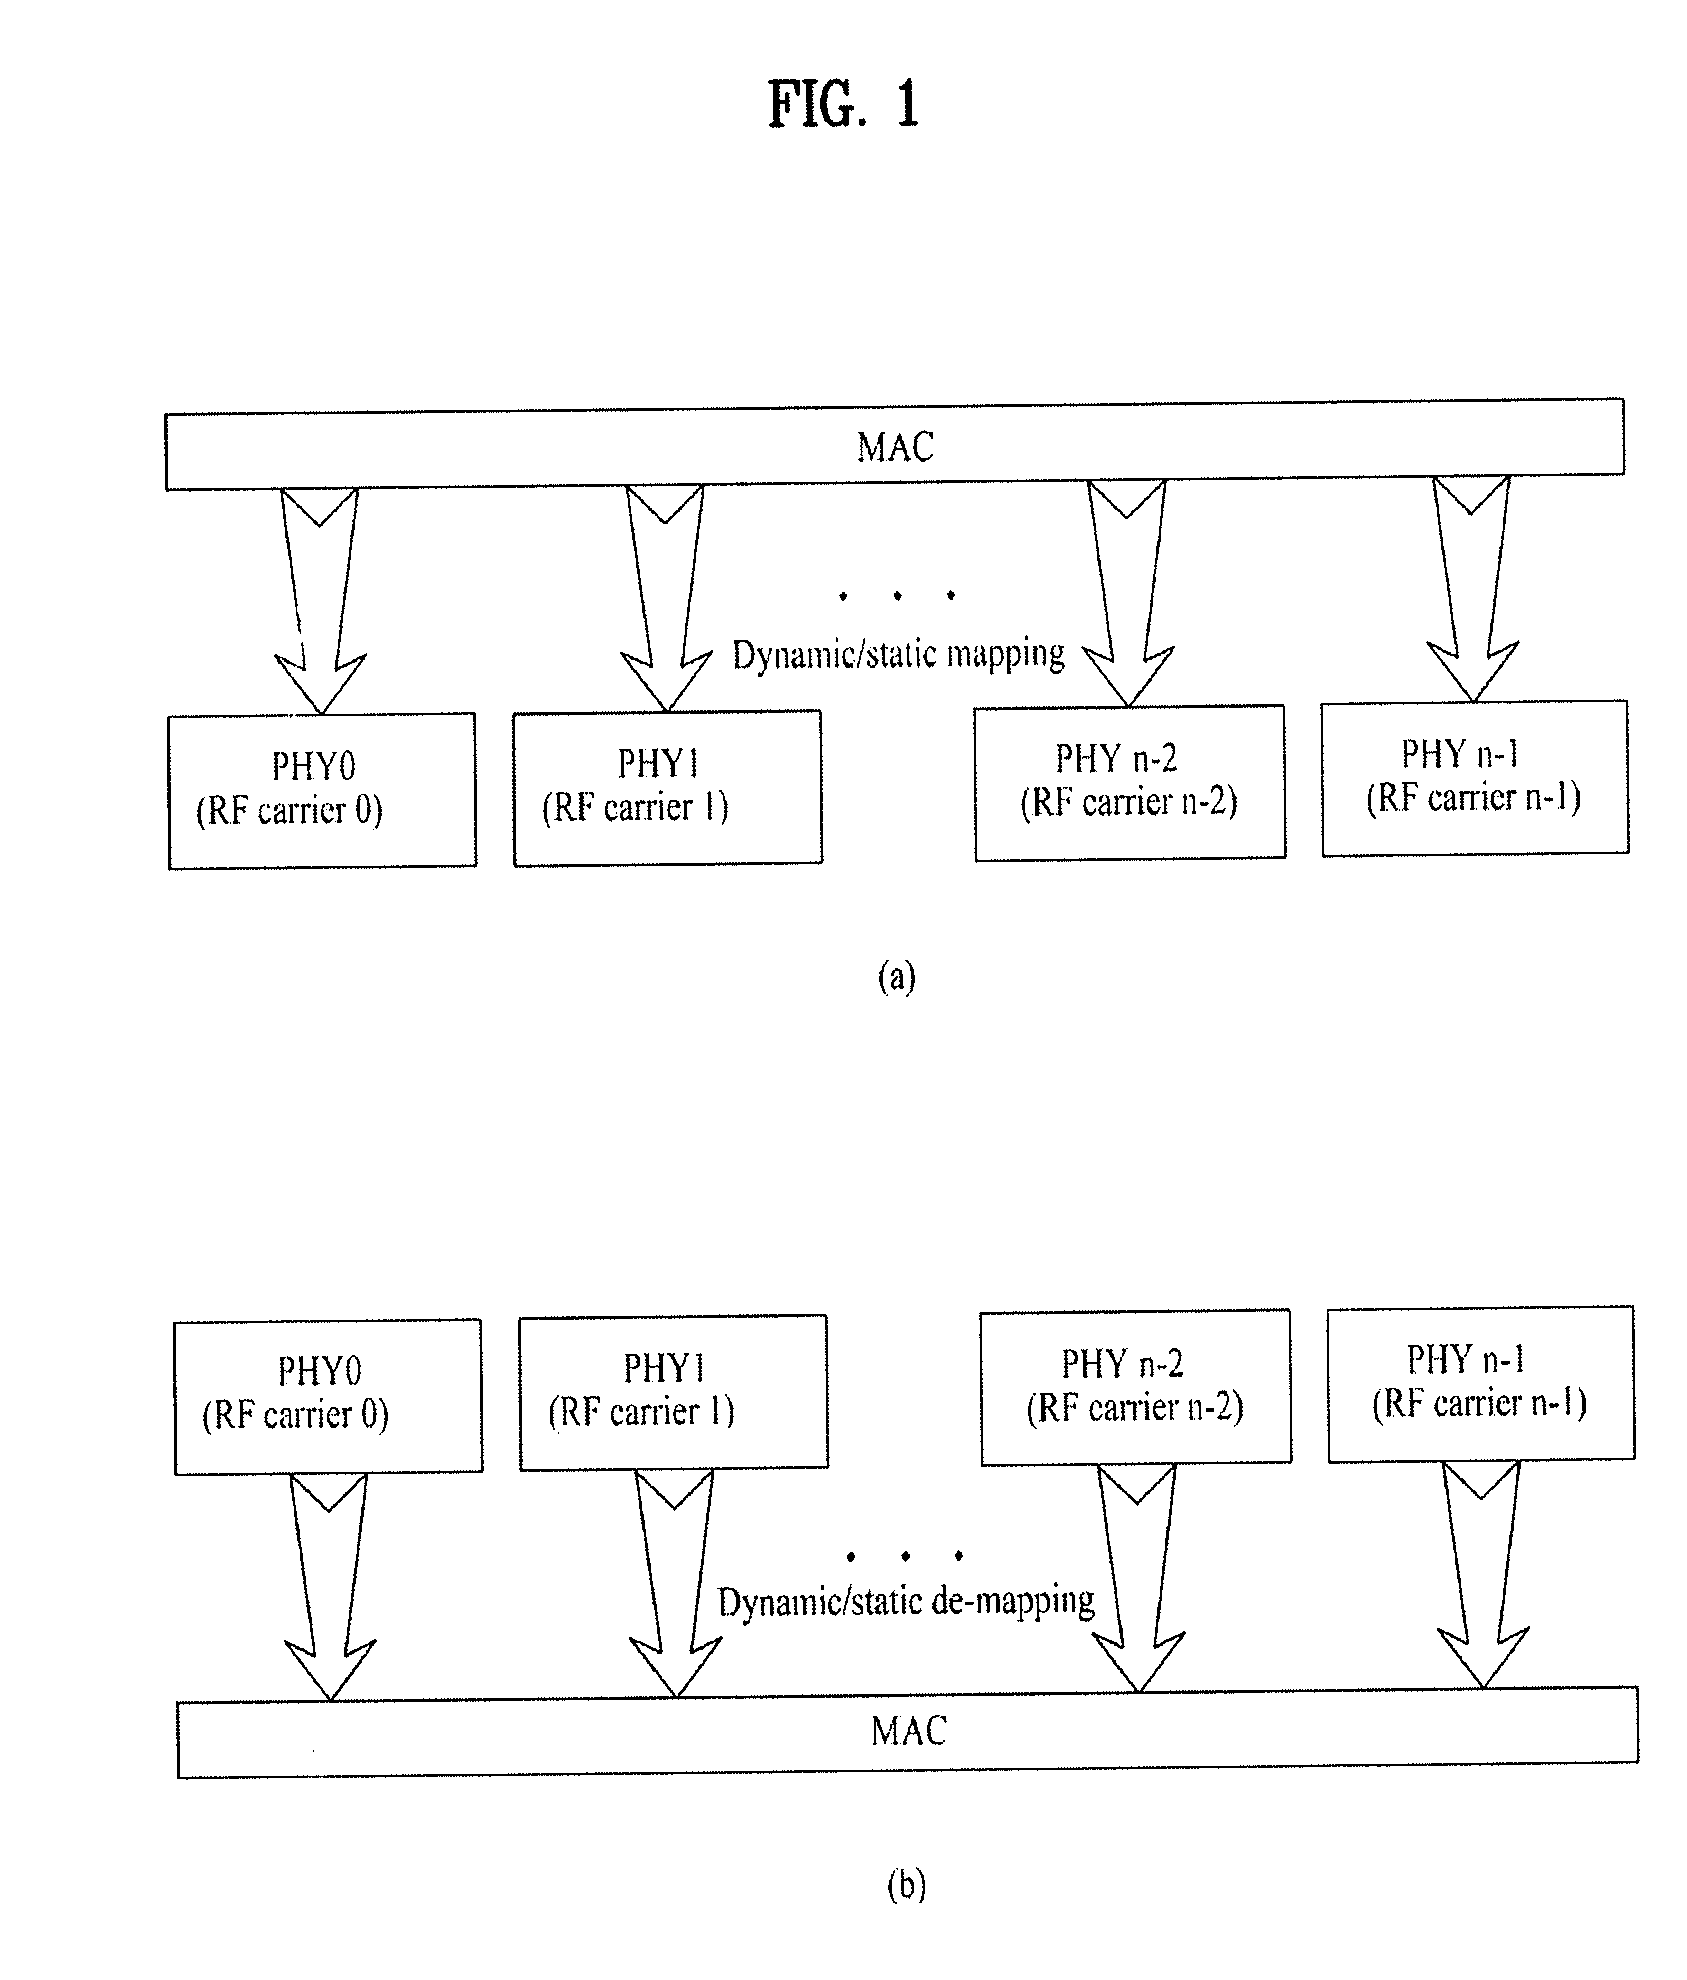 Method for transmitting and receiving signals using multi-band radio frequencies